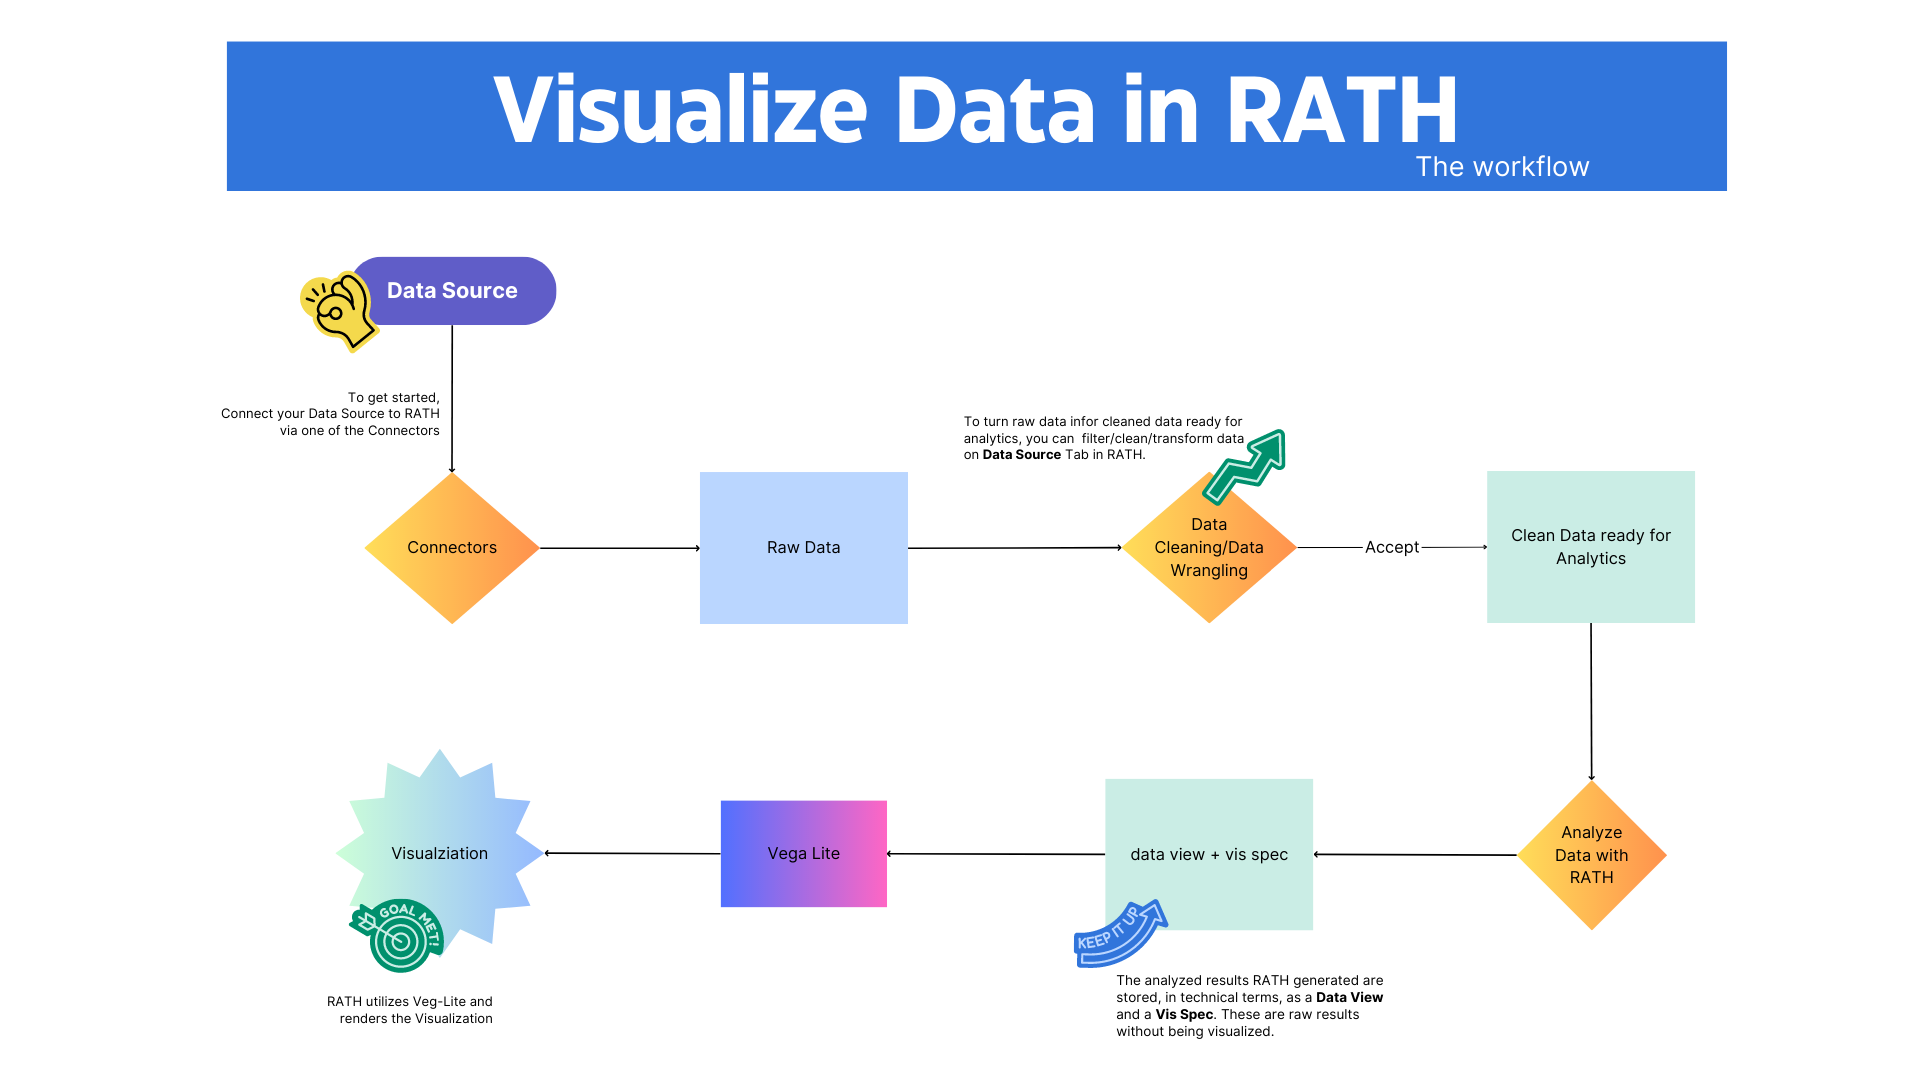 Process to Visualize Data with RATH